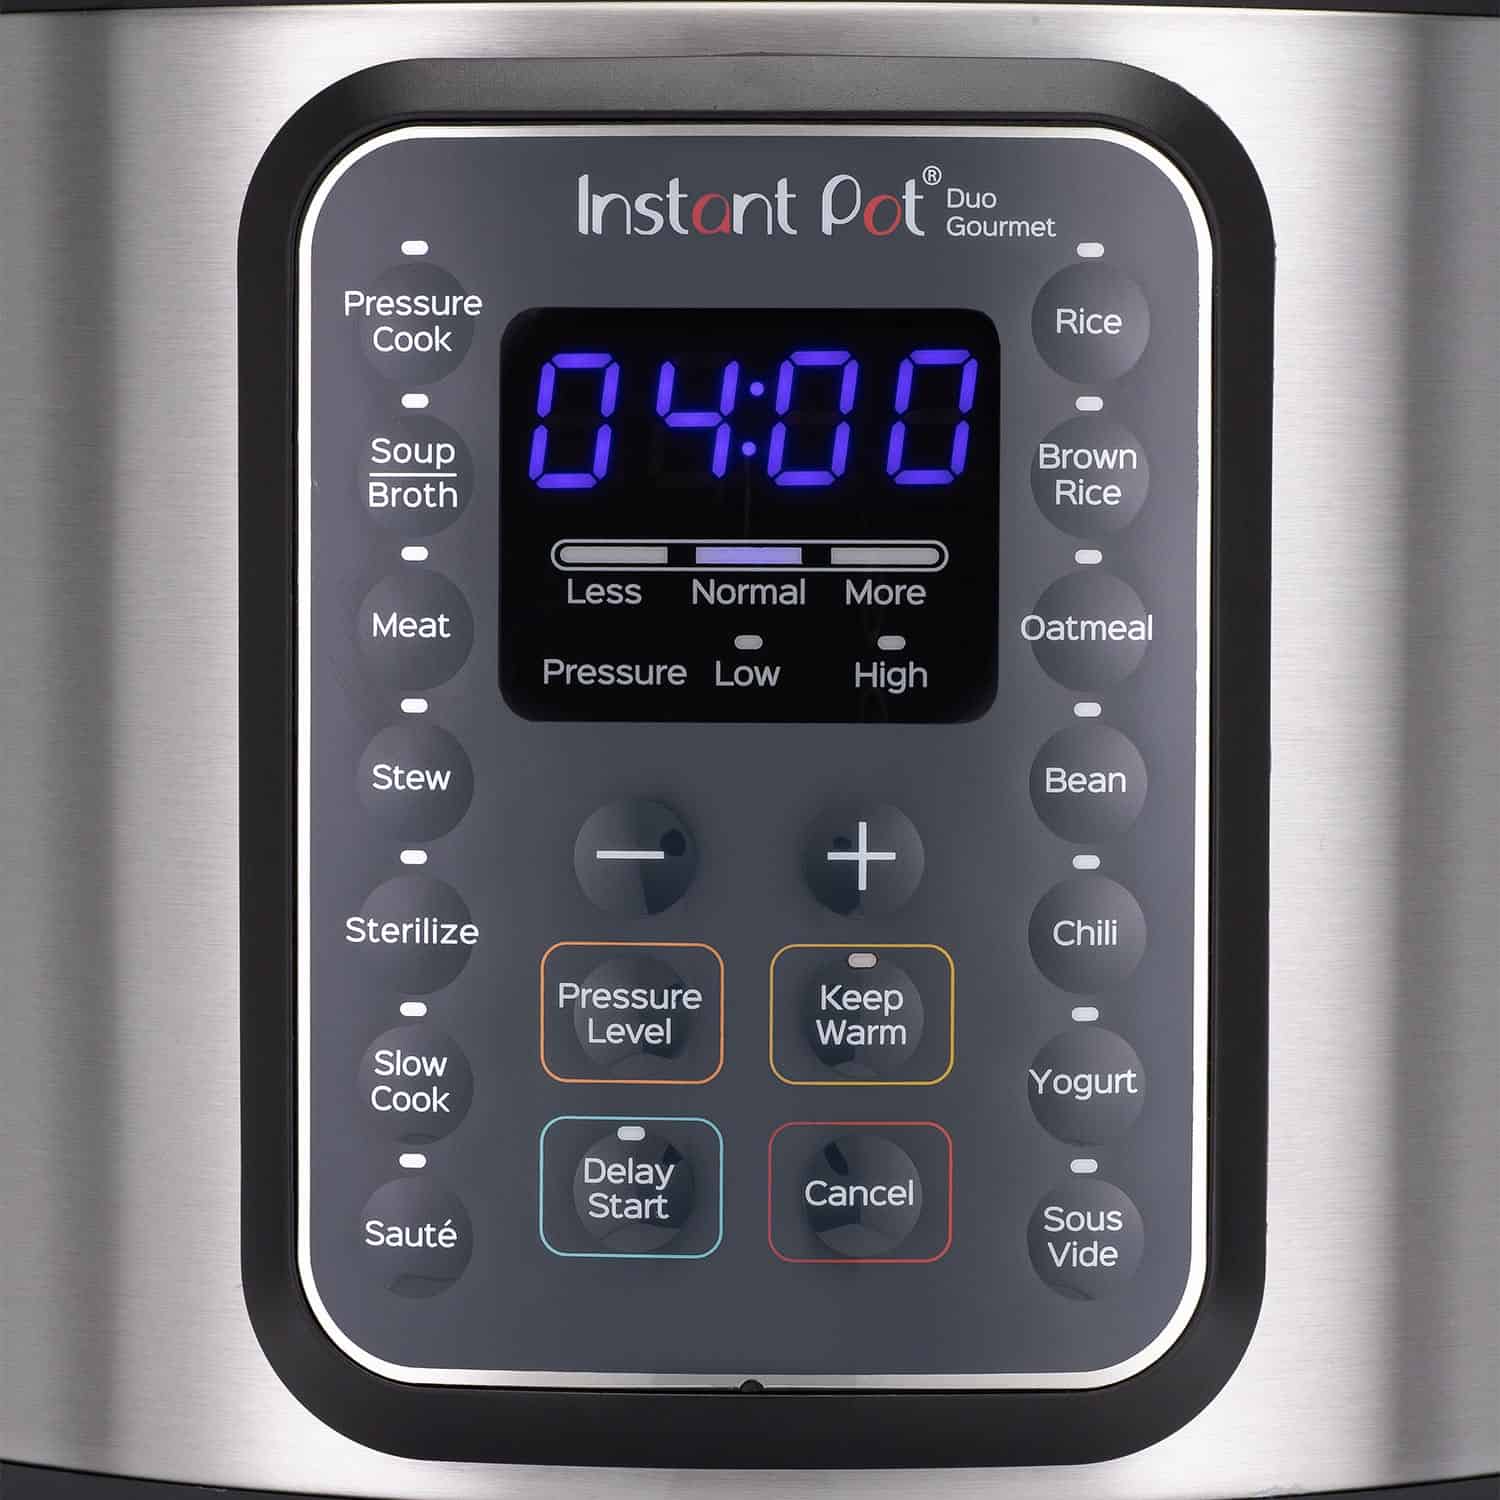 How to Use Instant Pot Delay Start